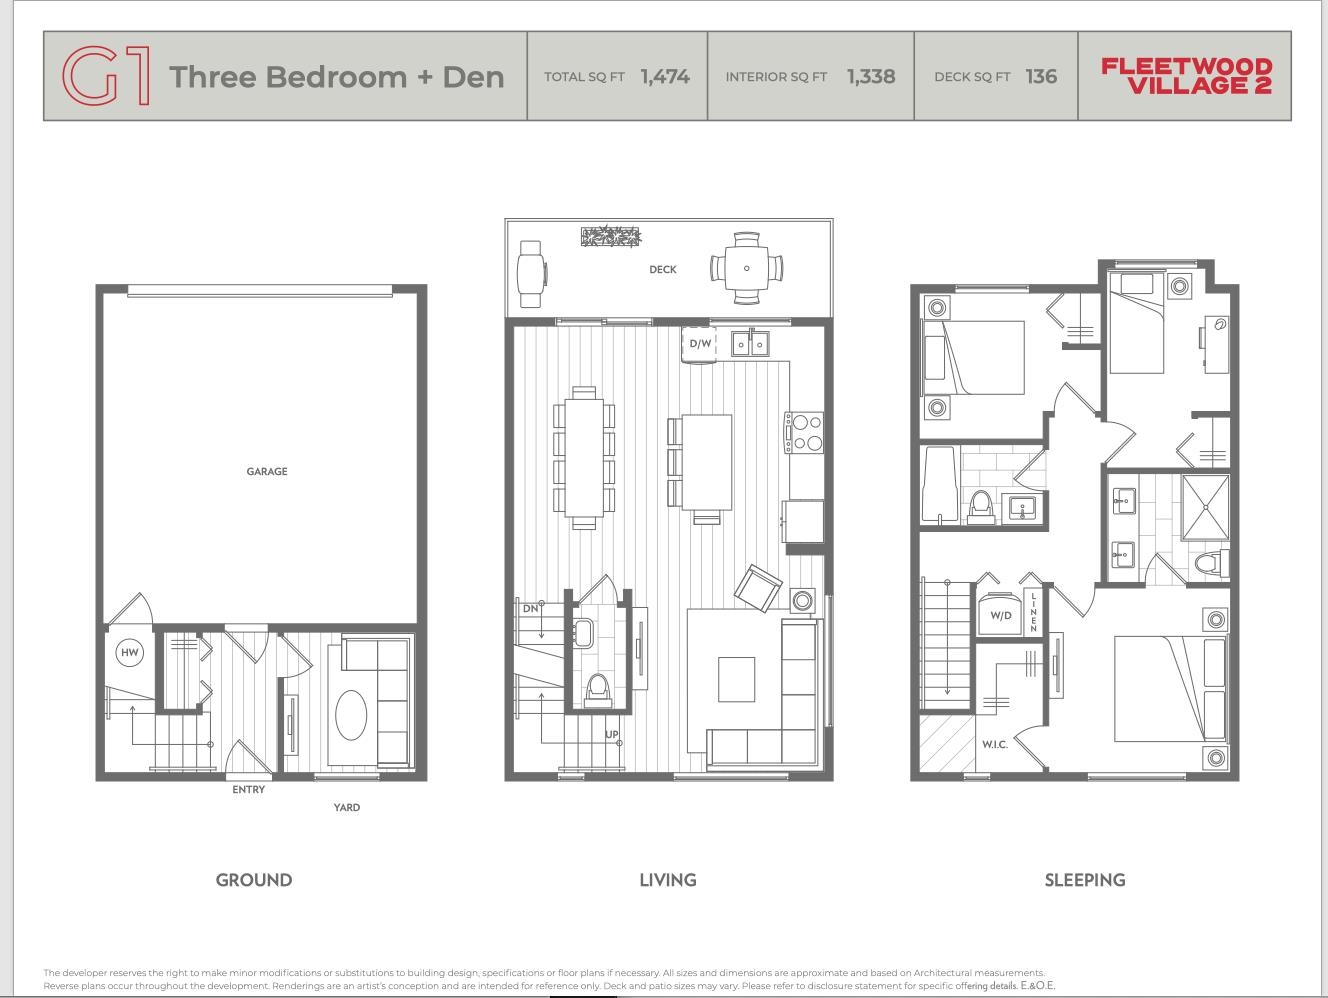 138 Floor Plan of Fleetwood Village 2 Towns with undefined beds